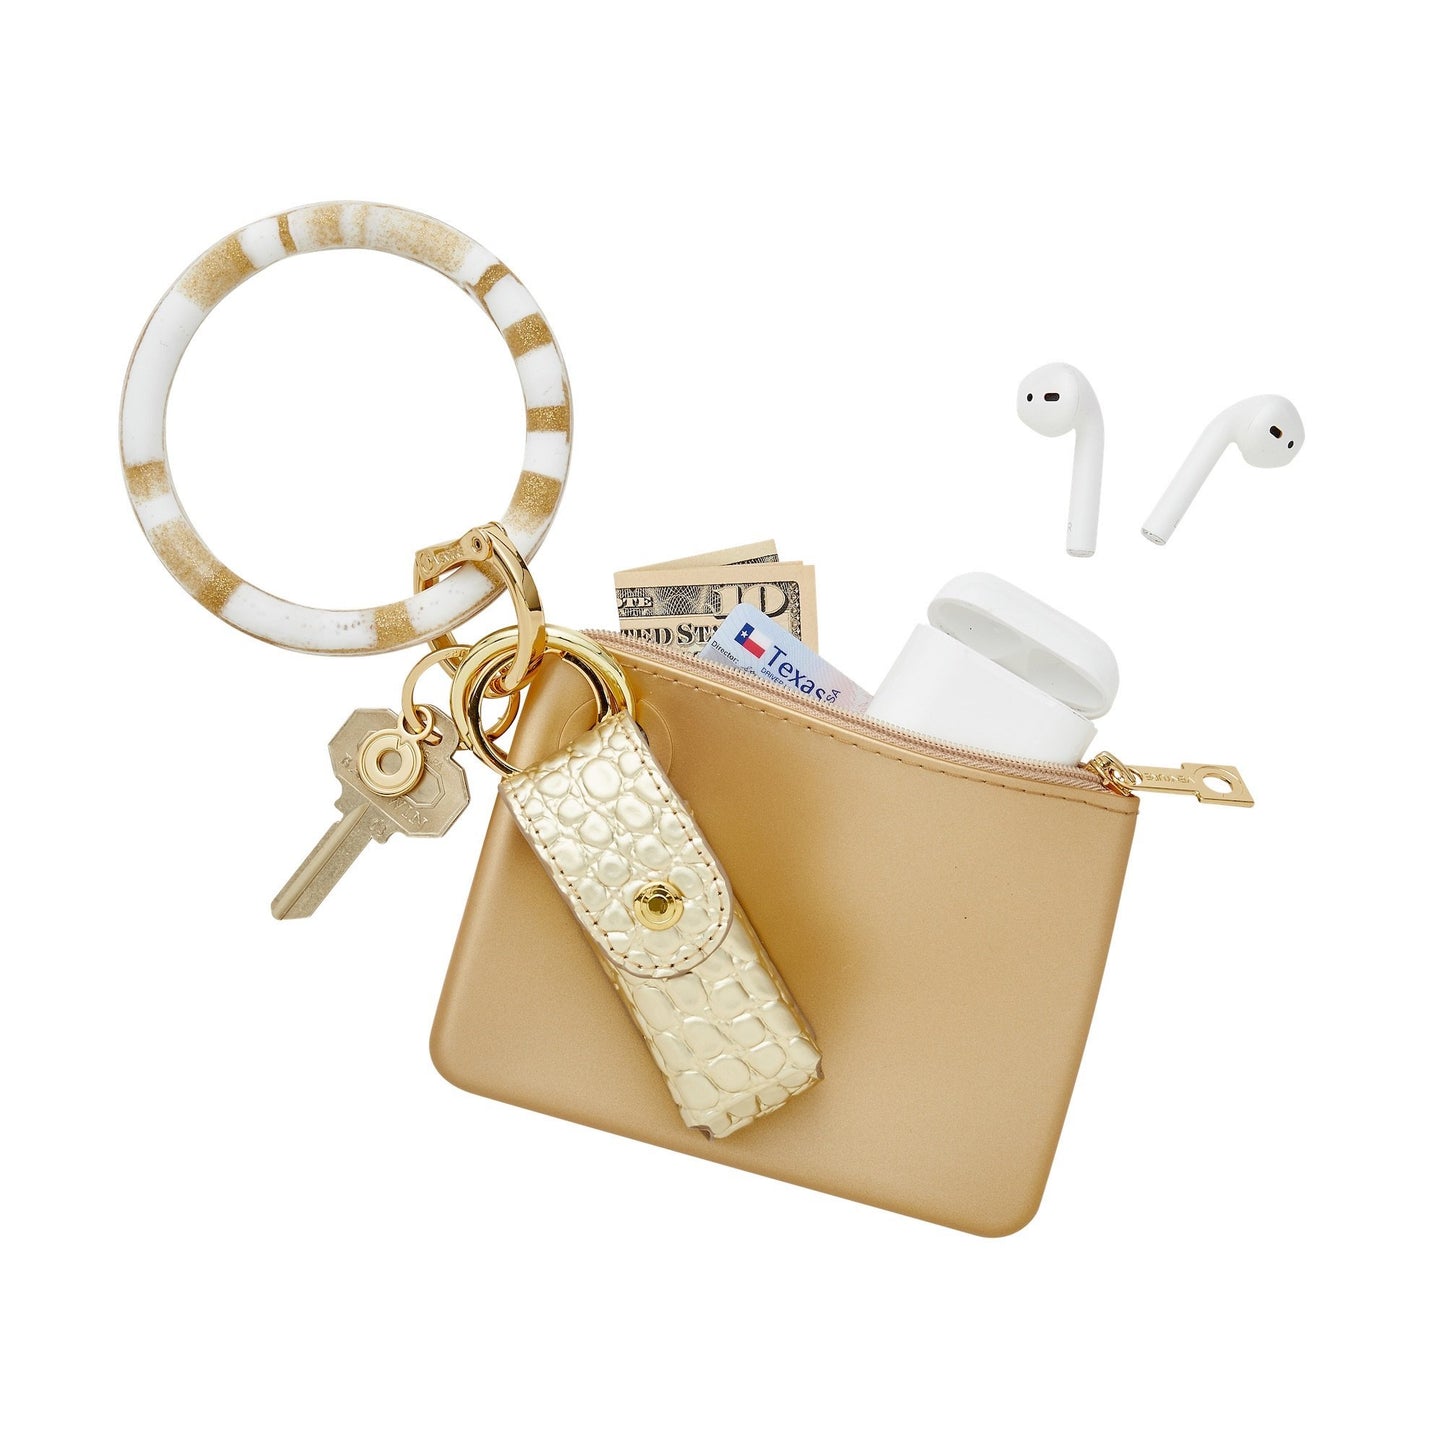 Gold Rush Marble - Silicone Big O Key Ring by Oventure with a mini silicone pouch attached in gold silicone and a lipstick holder in gold leather.